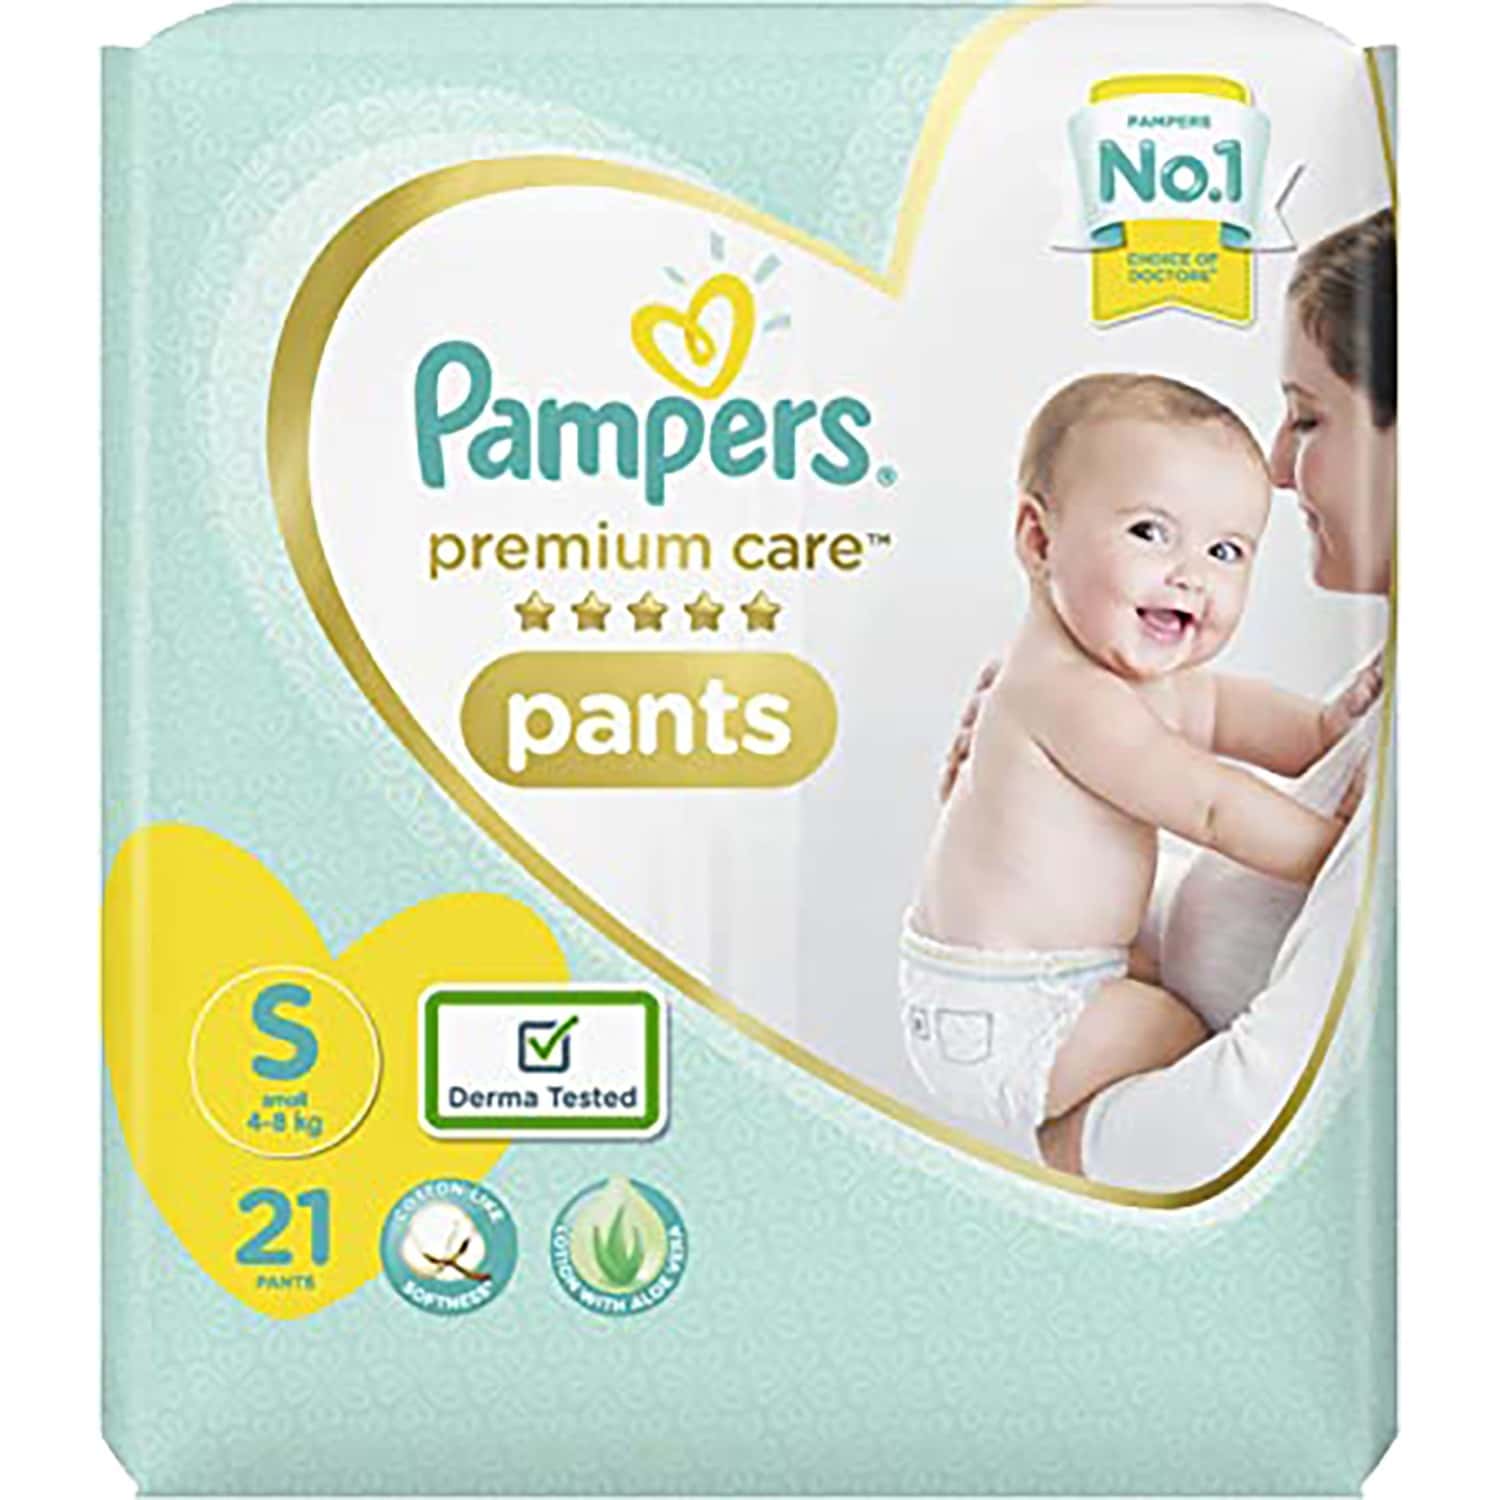 Pampers Baby Dry Review | Tested by GearLab